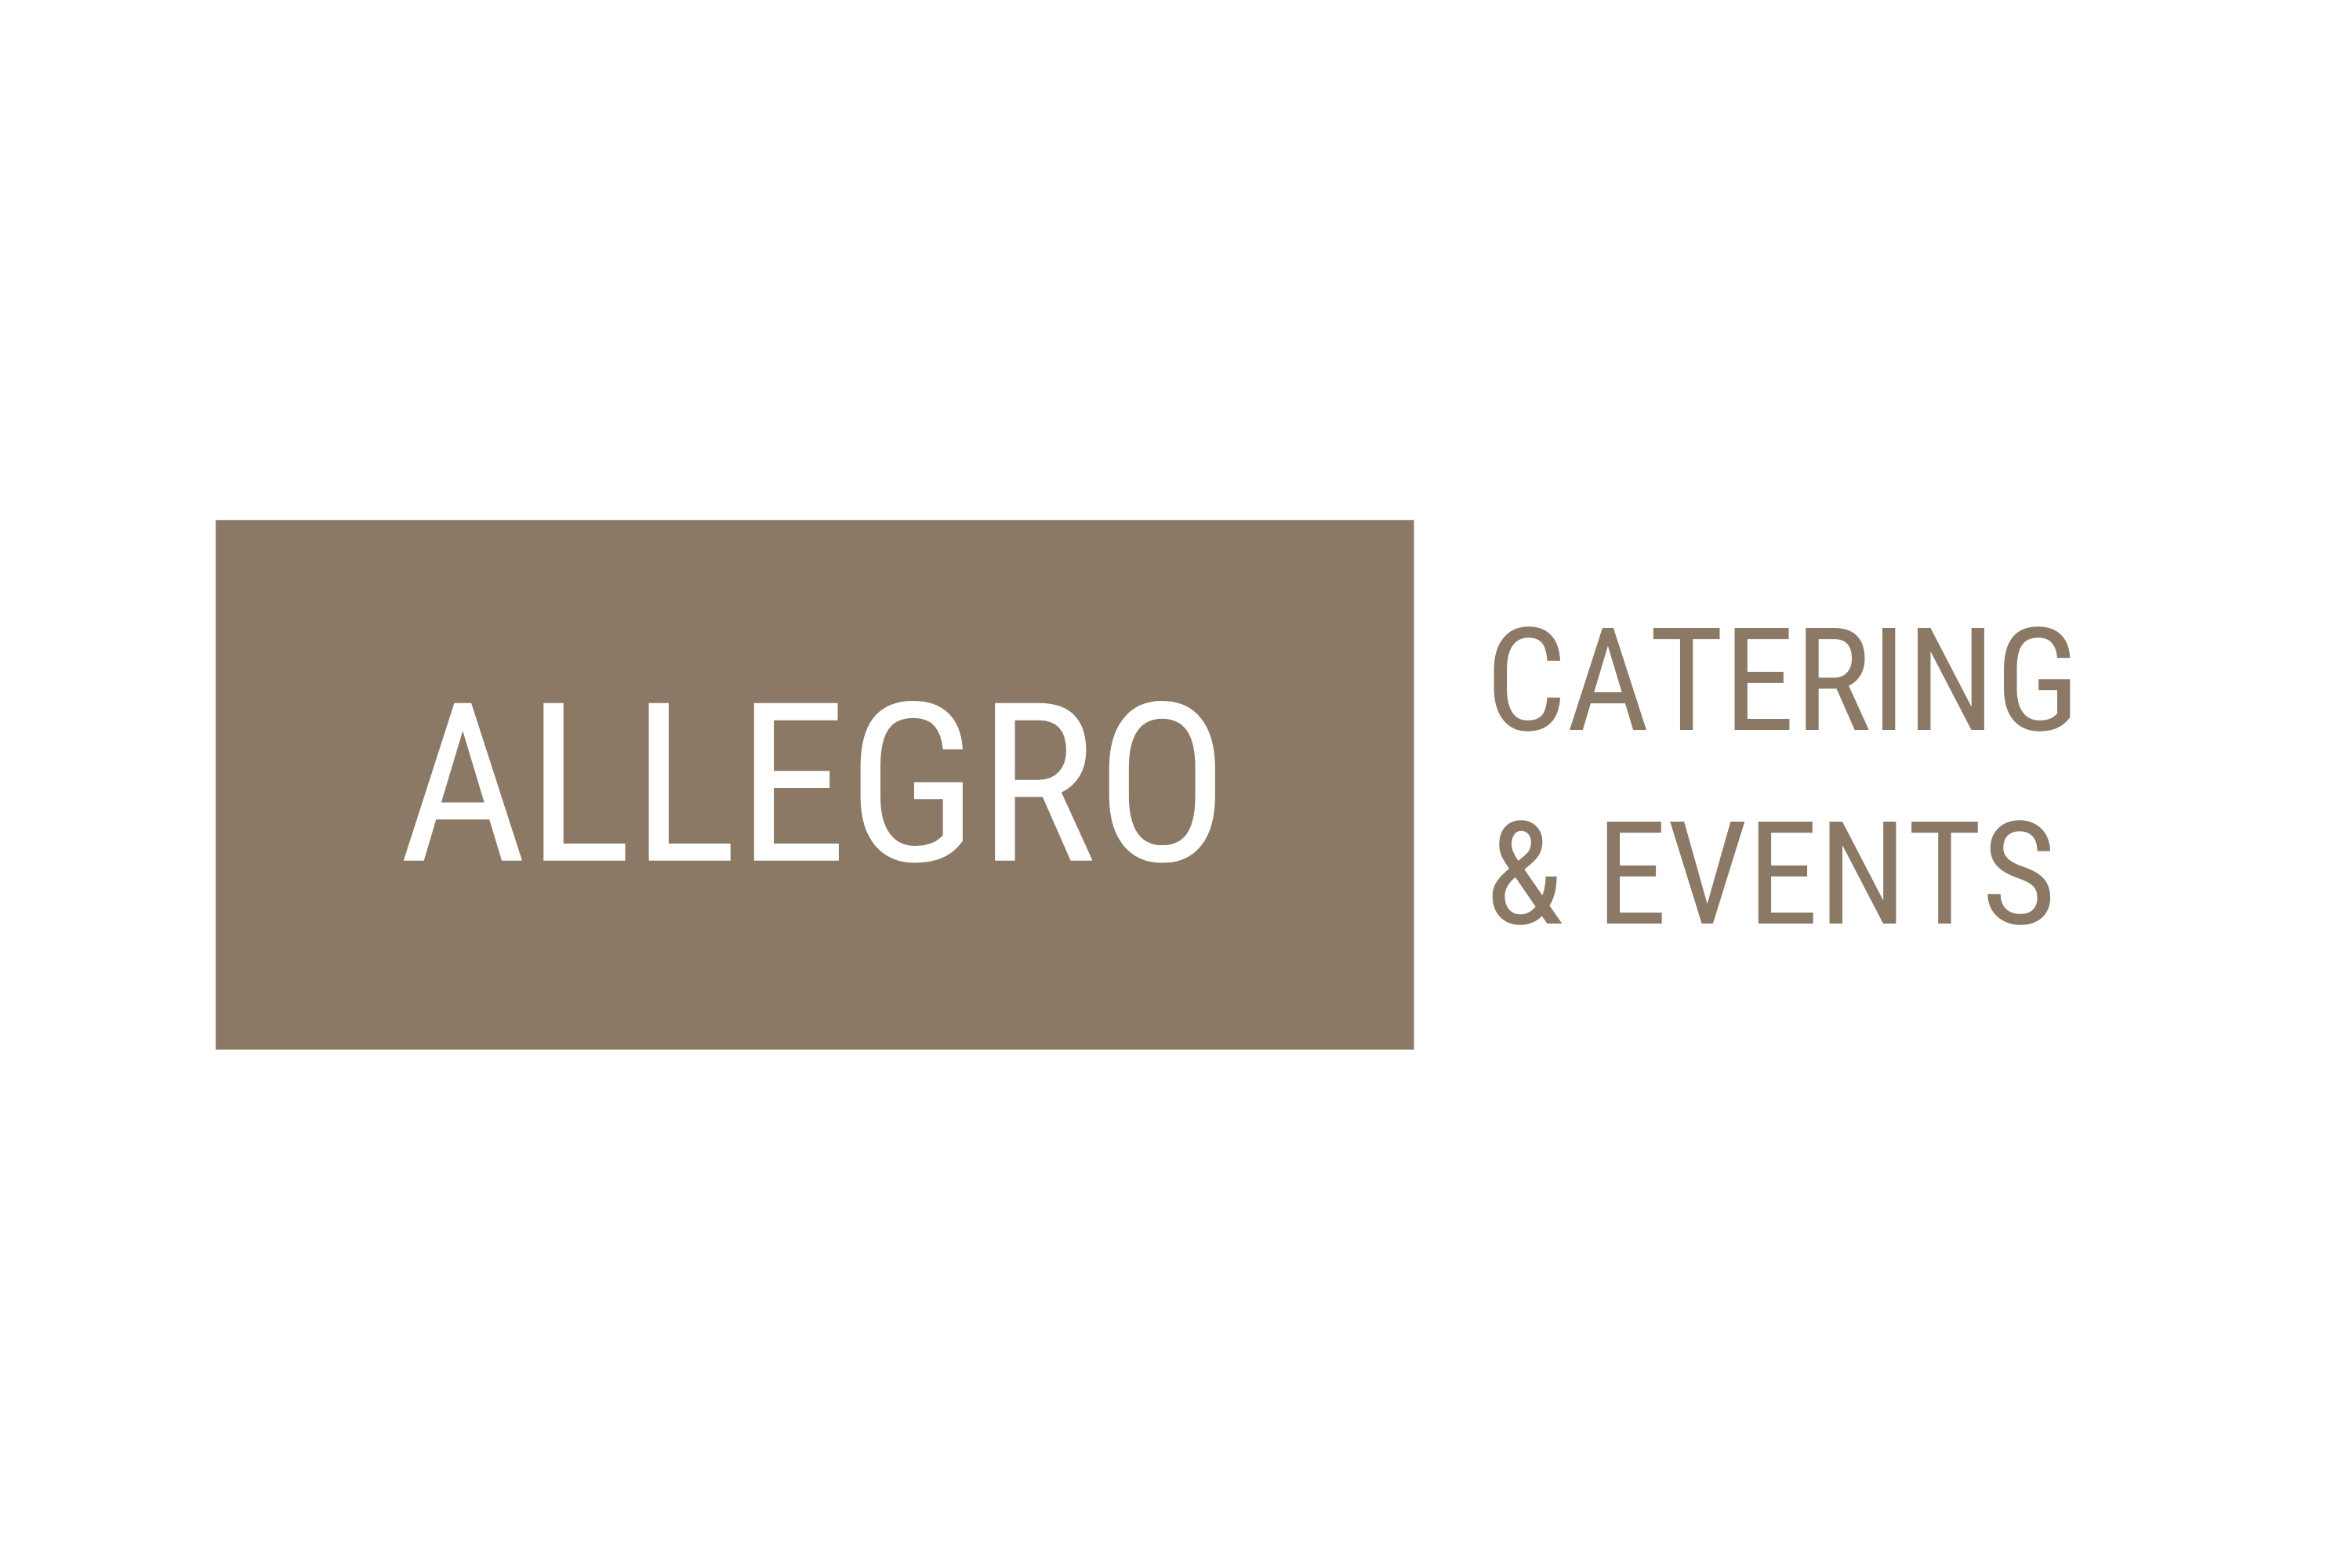 White text reads "Allegro" on light brown rectangular background, alongside light brown text that reads "Catering & Events" on white background